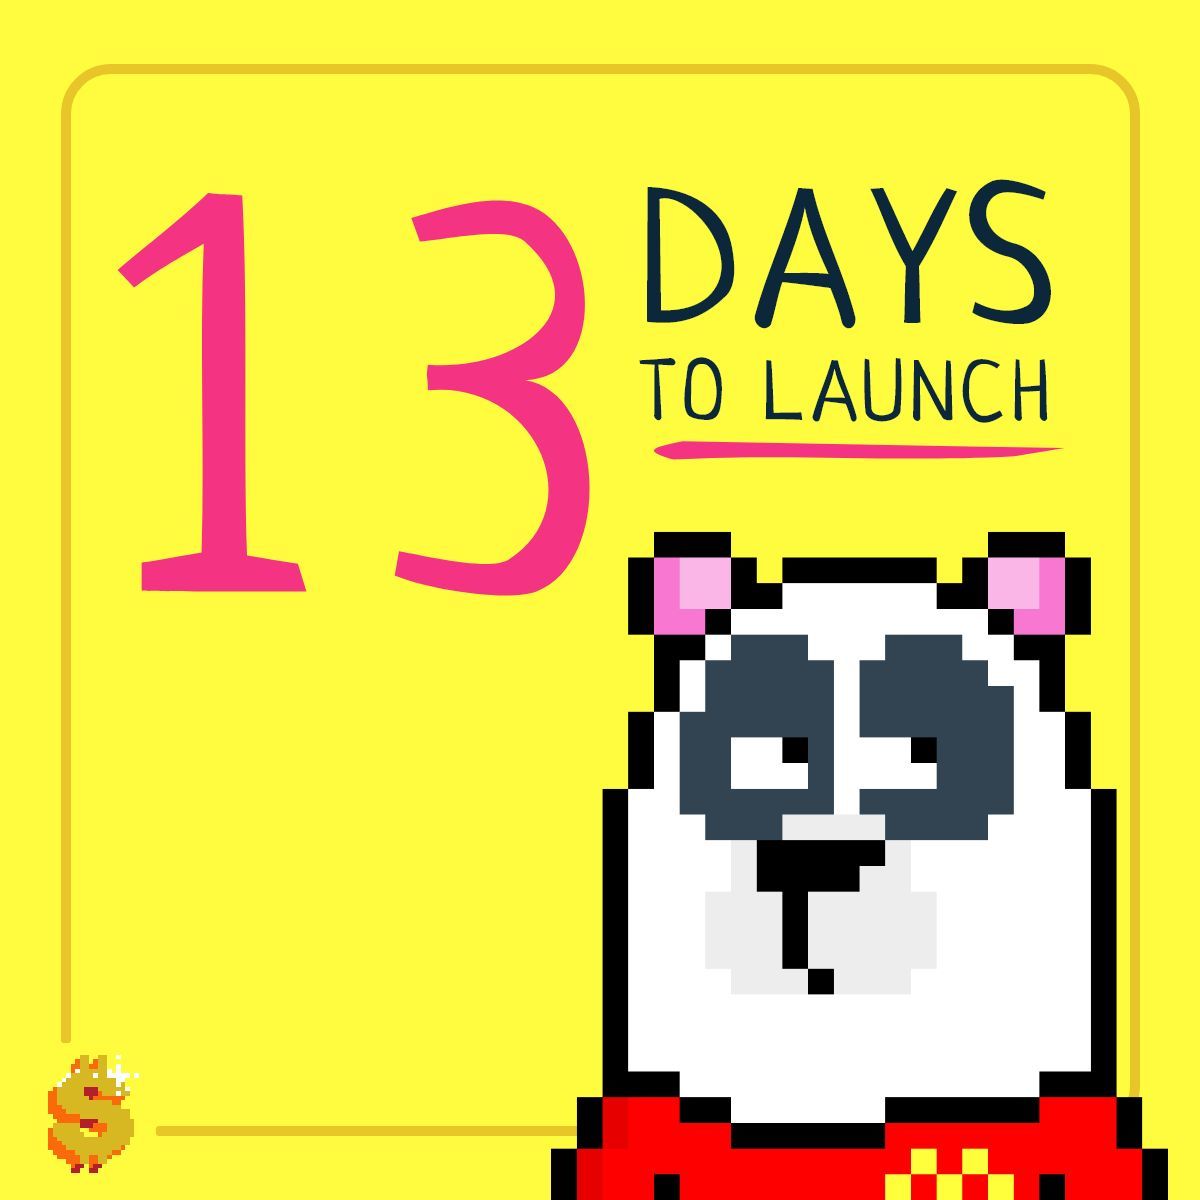 The countdown is on!

Get ready to shape the future of NFTs alongside passionate creators and collectors.

Be a co-owner of the first community owned marketplace on $ICP

13 DAYS and counting...

#ICP #InternetComputer #CommunityOwned